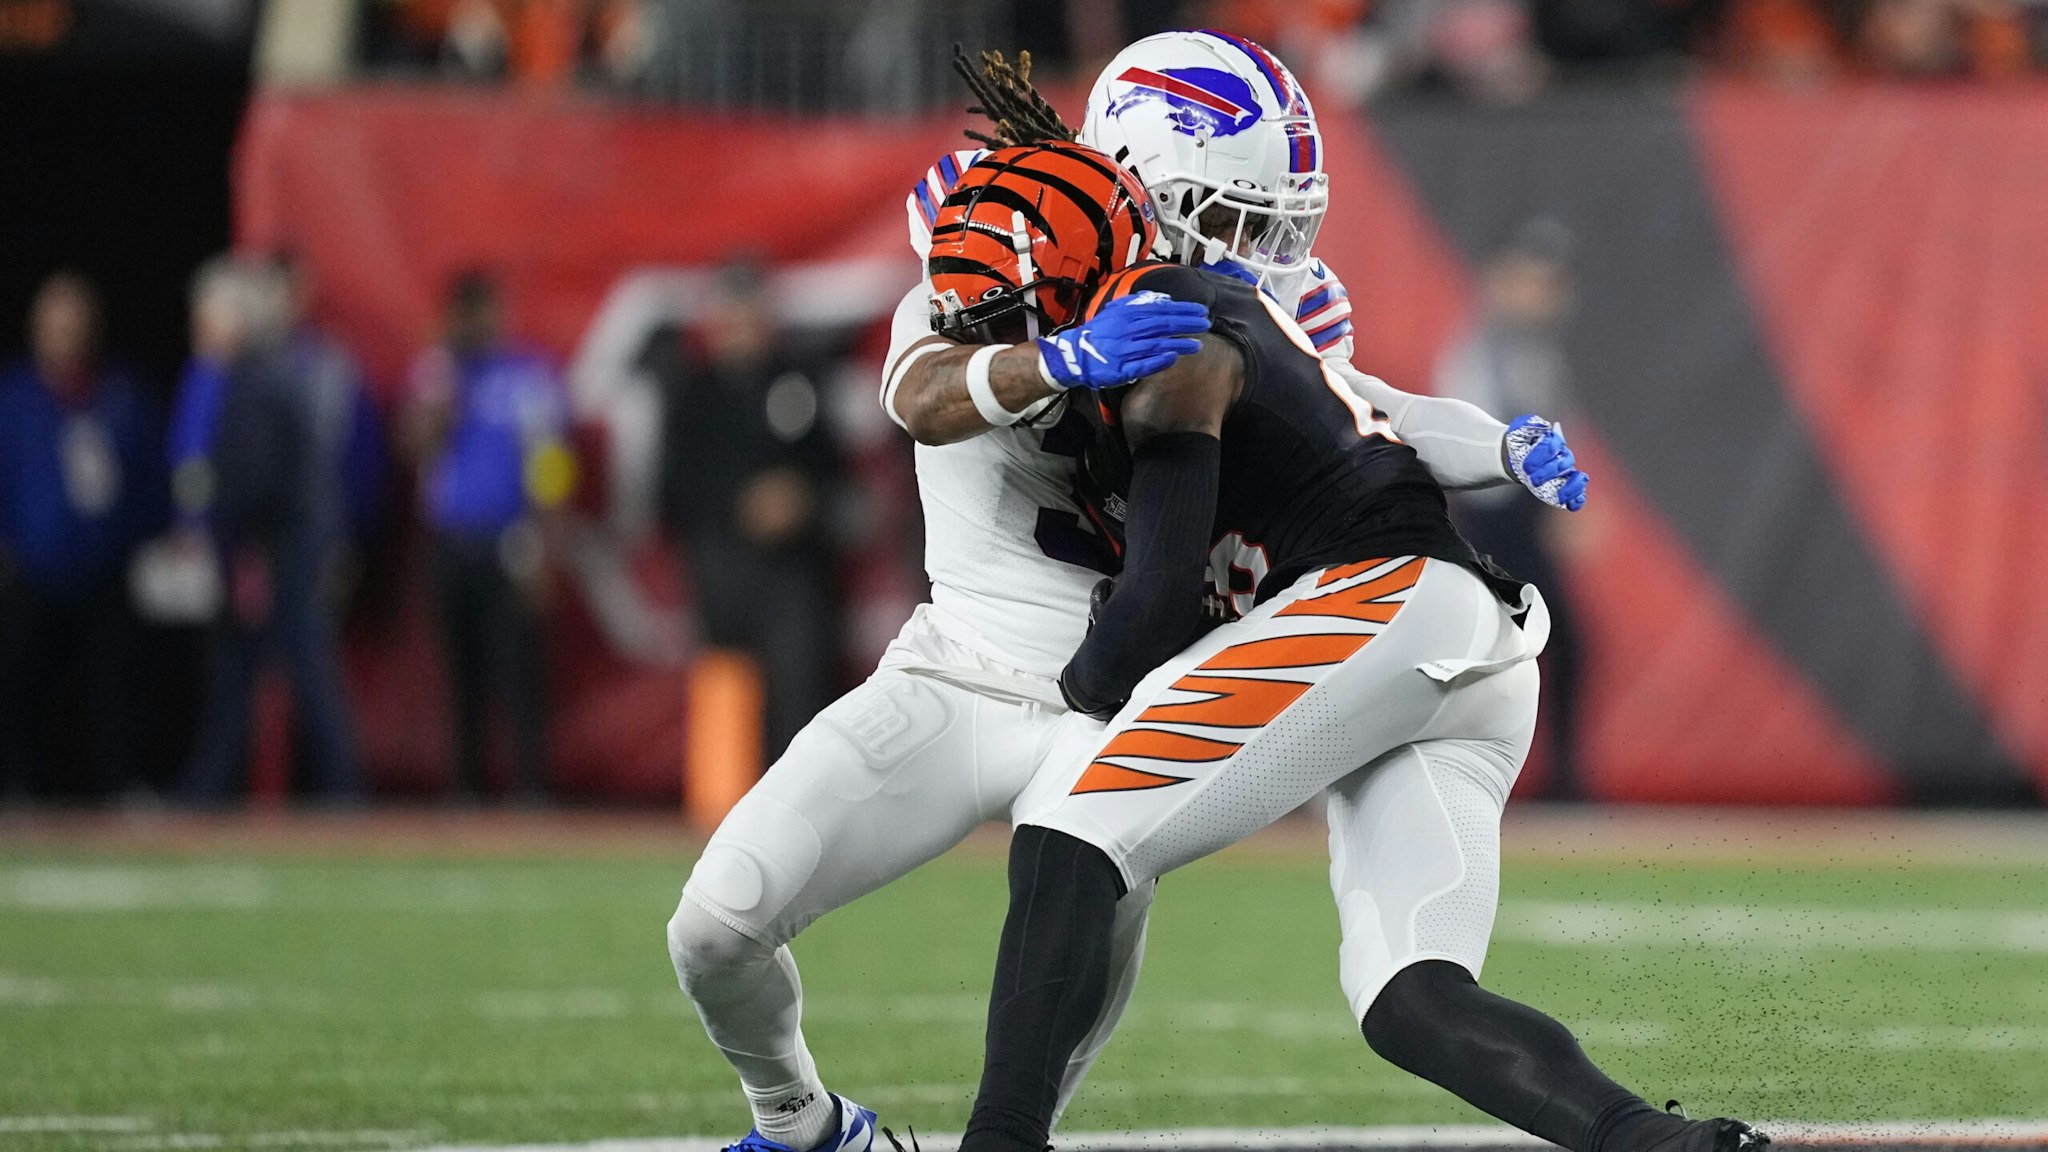 CINCINNATI, OHIO - JANUARY 02: Damar Hamlin #3 of the Buffalo Bills tackles Tee Higgins #85 of the Cincinnati Bengals during the first quarter at Paycor Stadium on January 02, 2023 in Cincinnati, Ohio. Hamlin was taken off the field by medical personnel following the play.